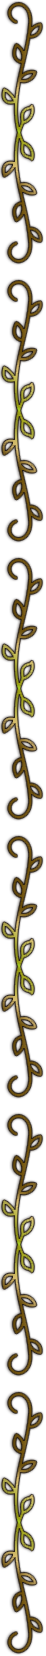 TiraNophi-SideVineDivider-Six-Flipped.png